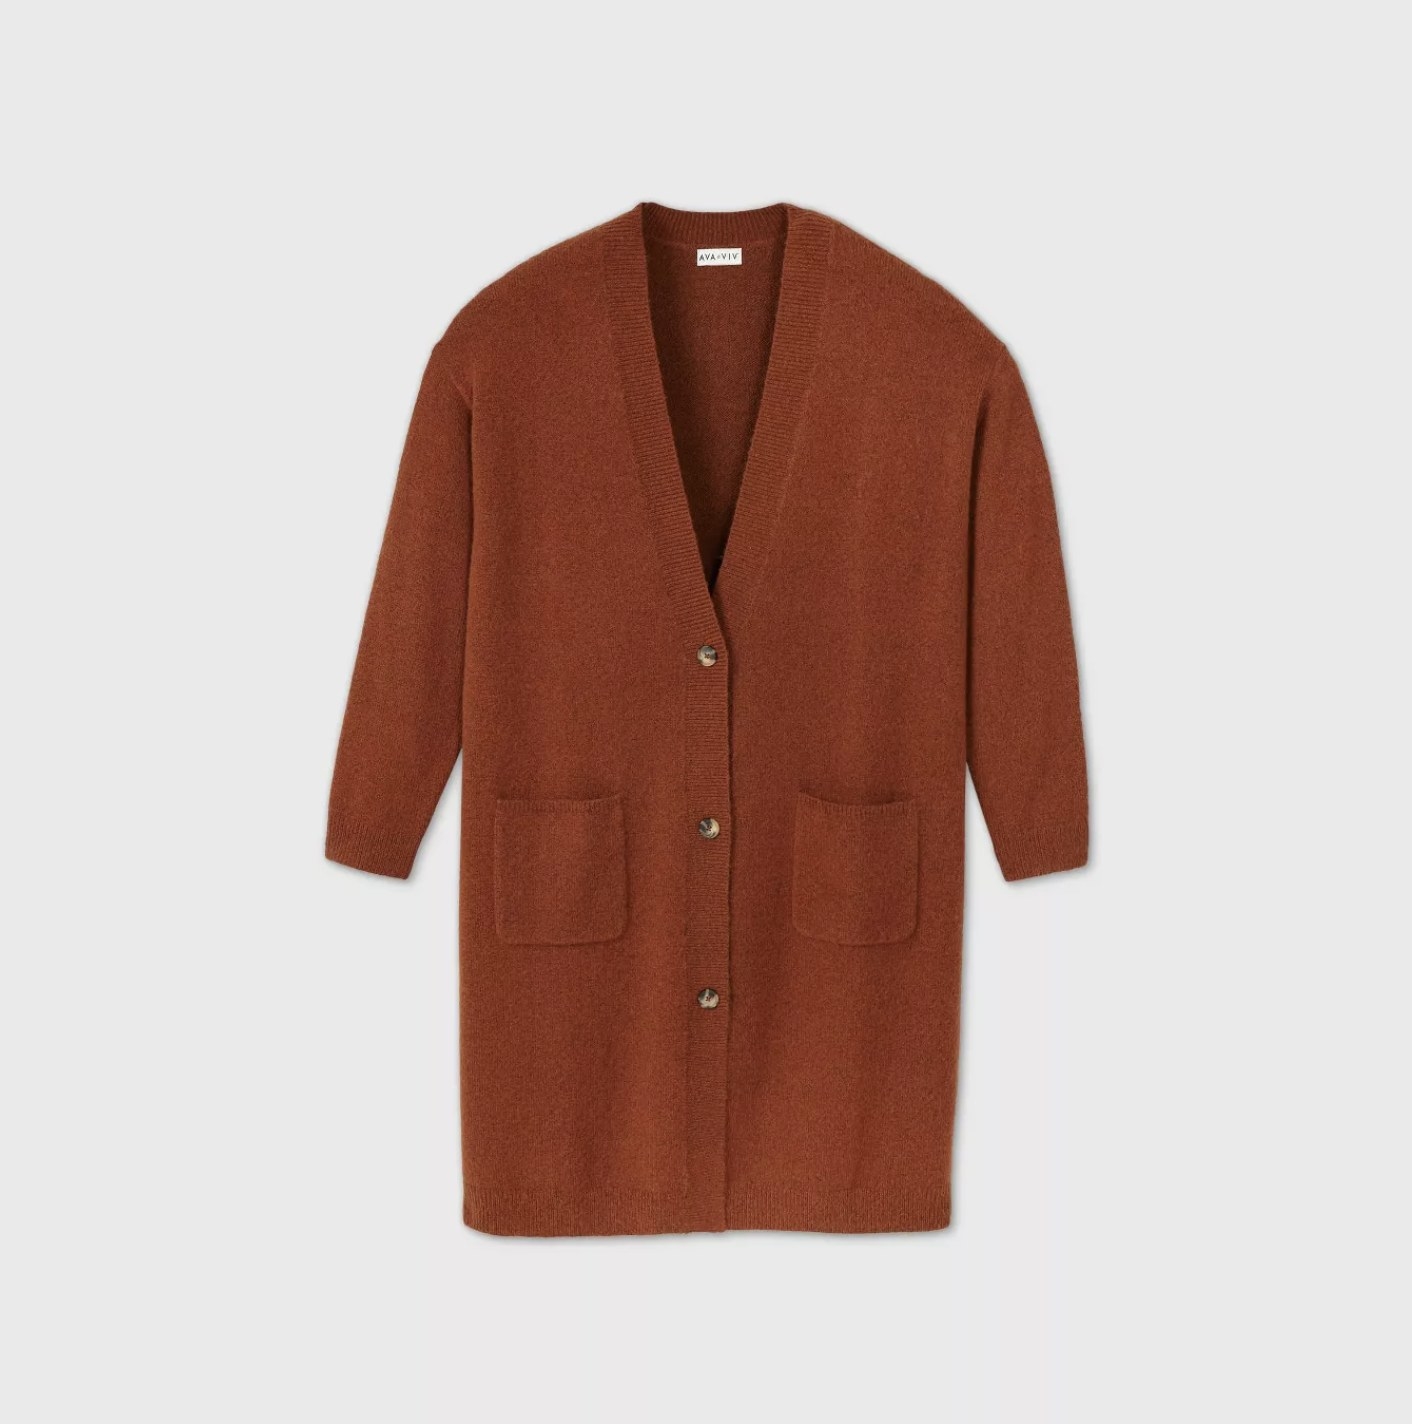 A burnt orange duster cardigan with a button front design and deep v-neckline